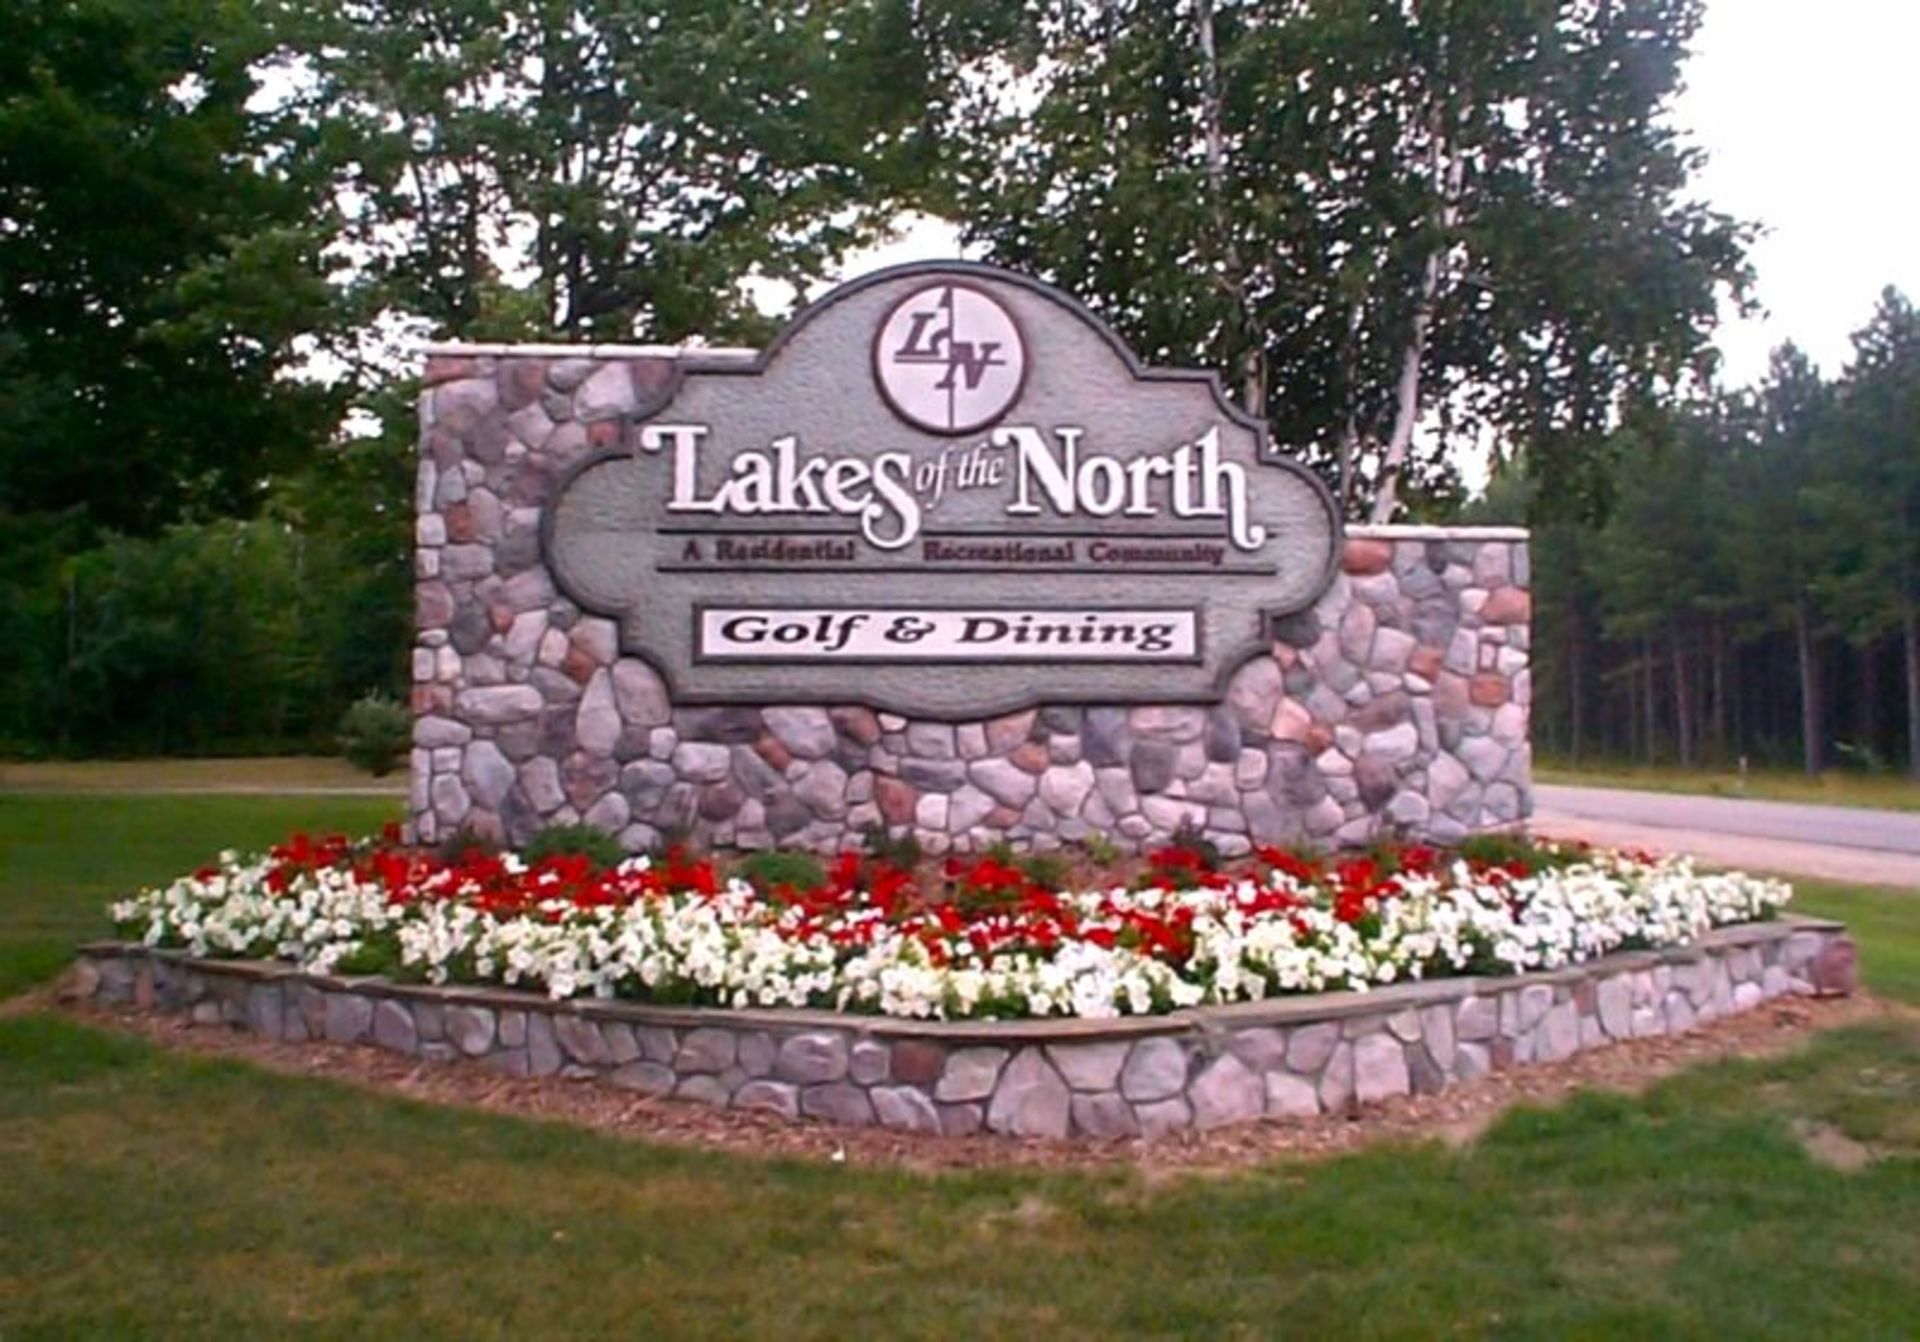 Build on This 0.66 Acre Lot in Michigan's "Lakes of the North" Community! - Image 9 of 10